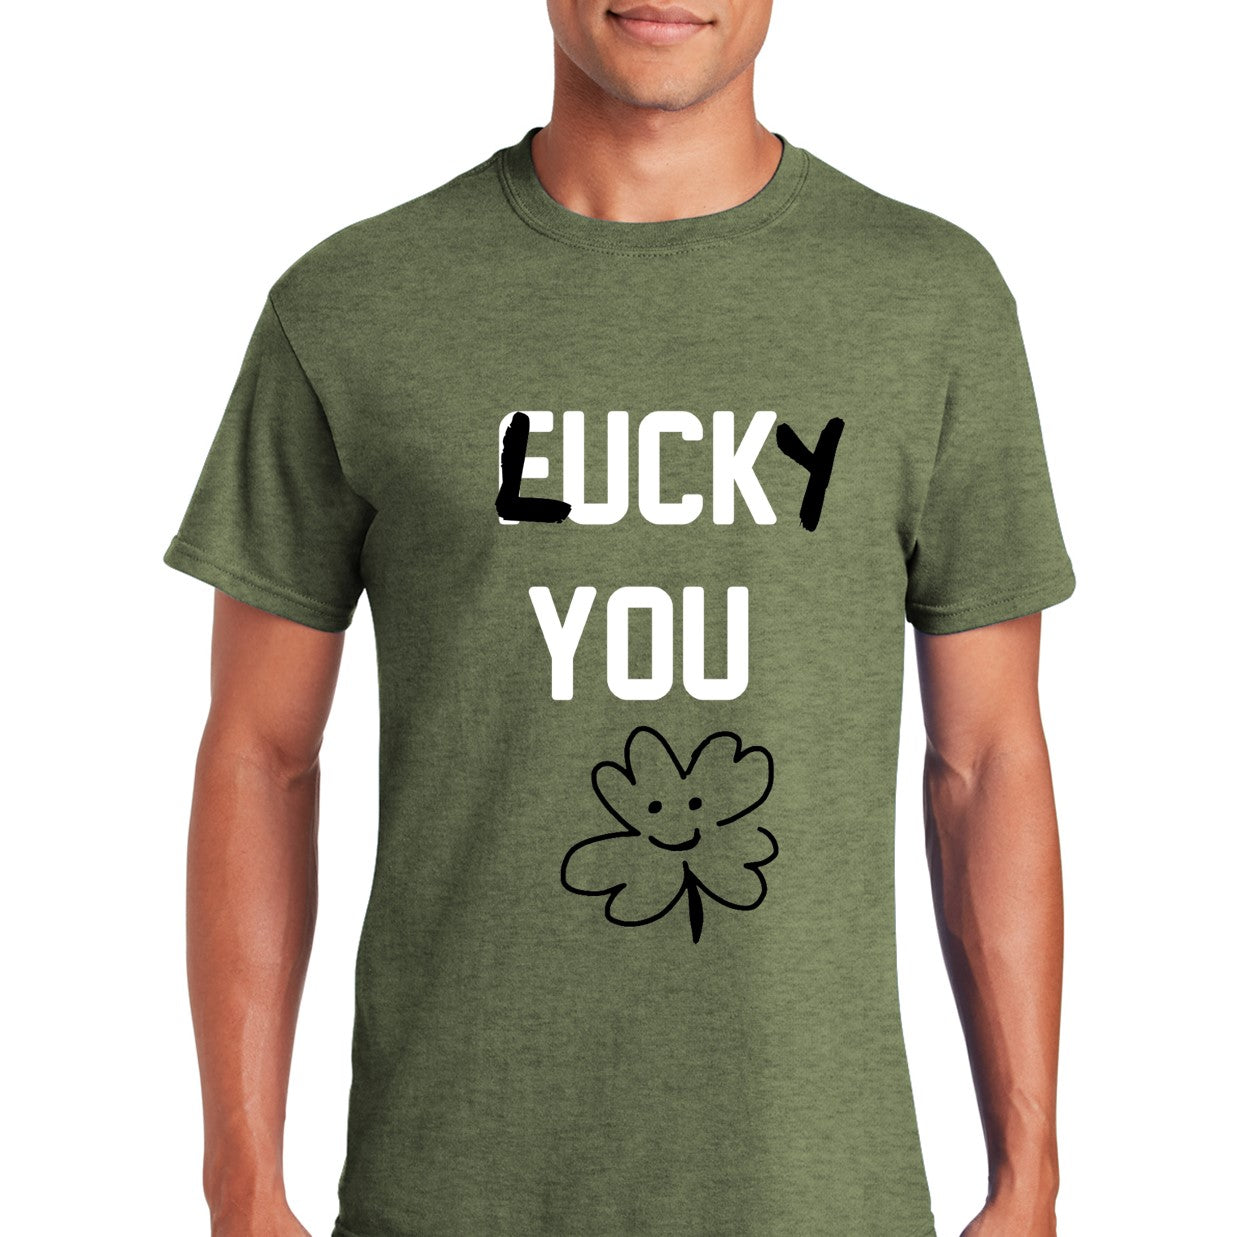 F*CK YOU/LUCKY YOU St. Patrick's Day Adult Unisex Soft Tee